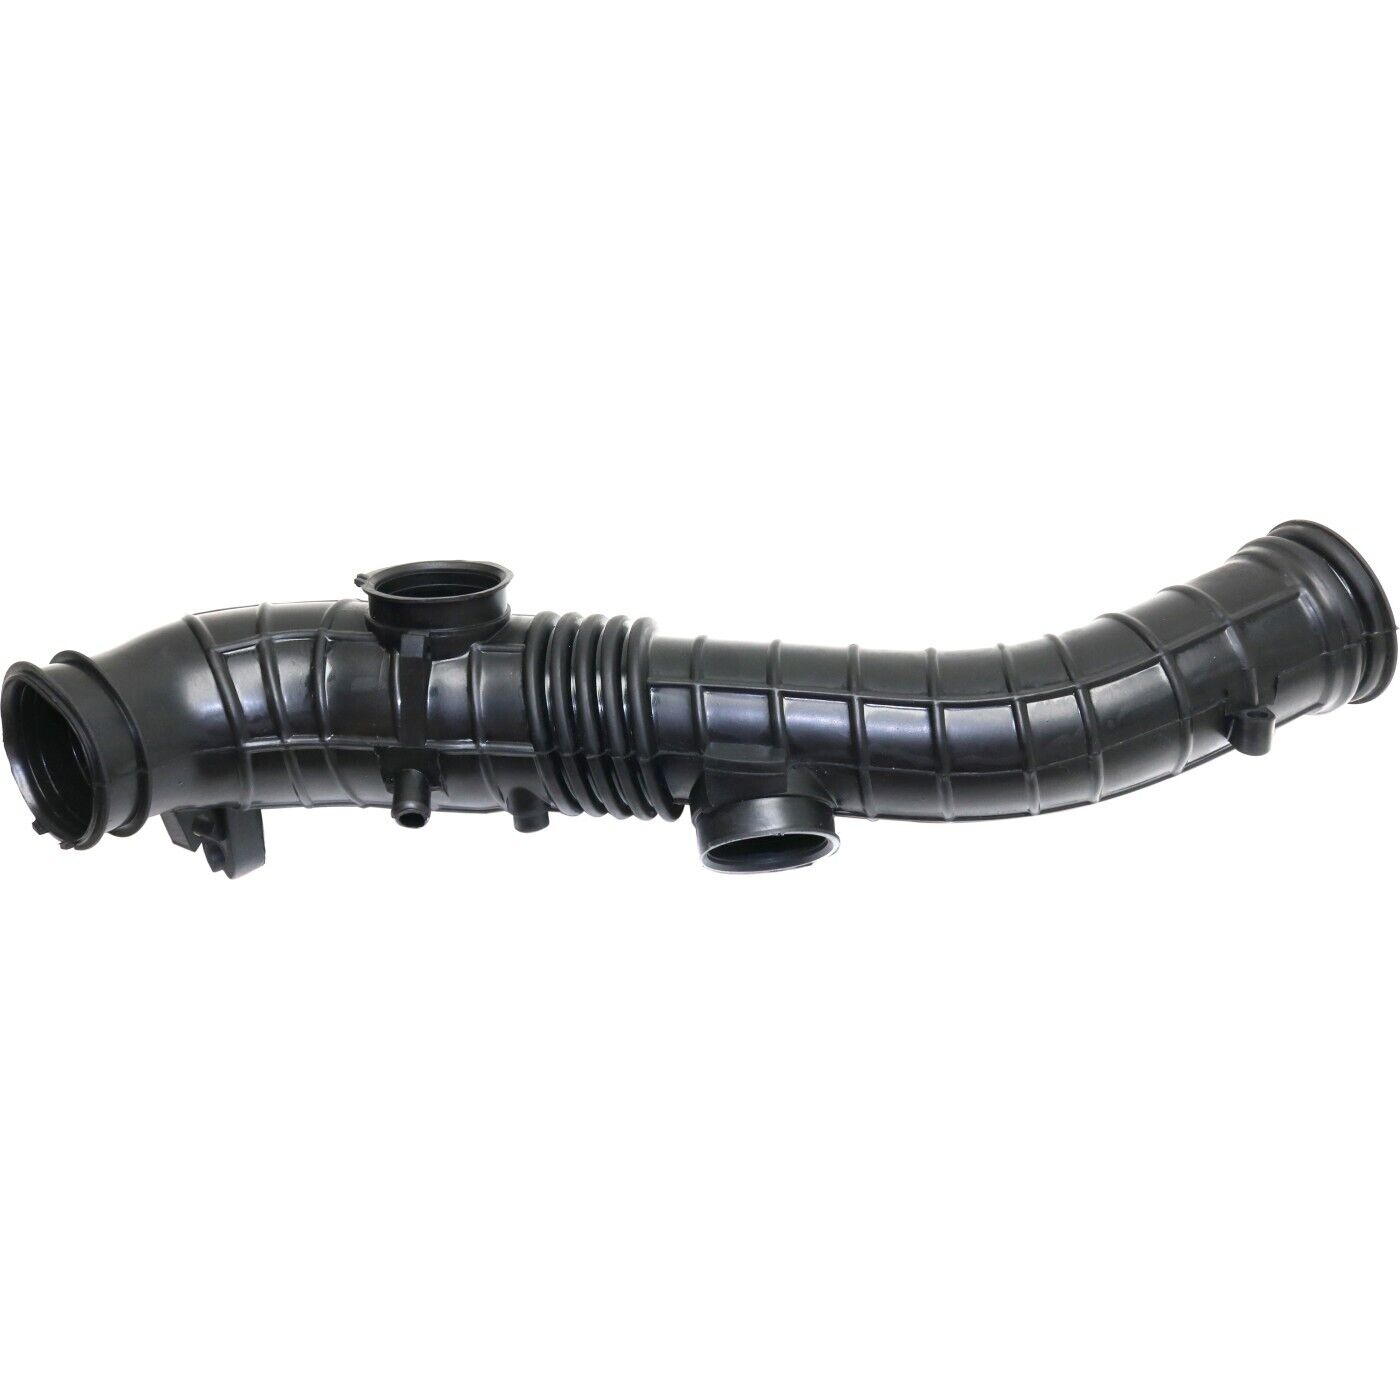 New Air Intake Hose for Honda Accord Odyssey Acura CL 1997 17228P0A000